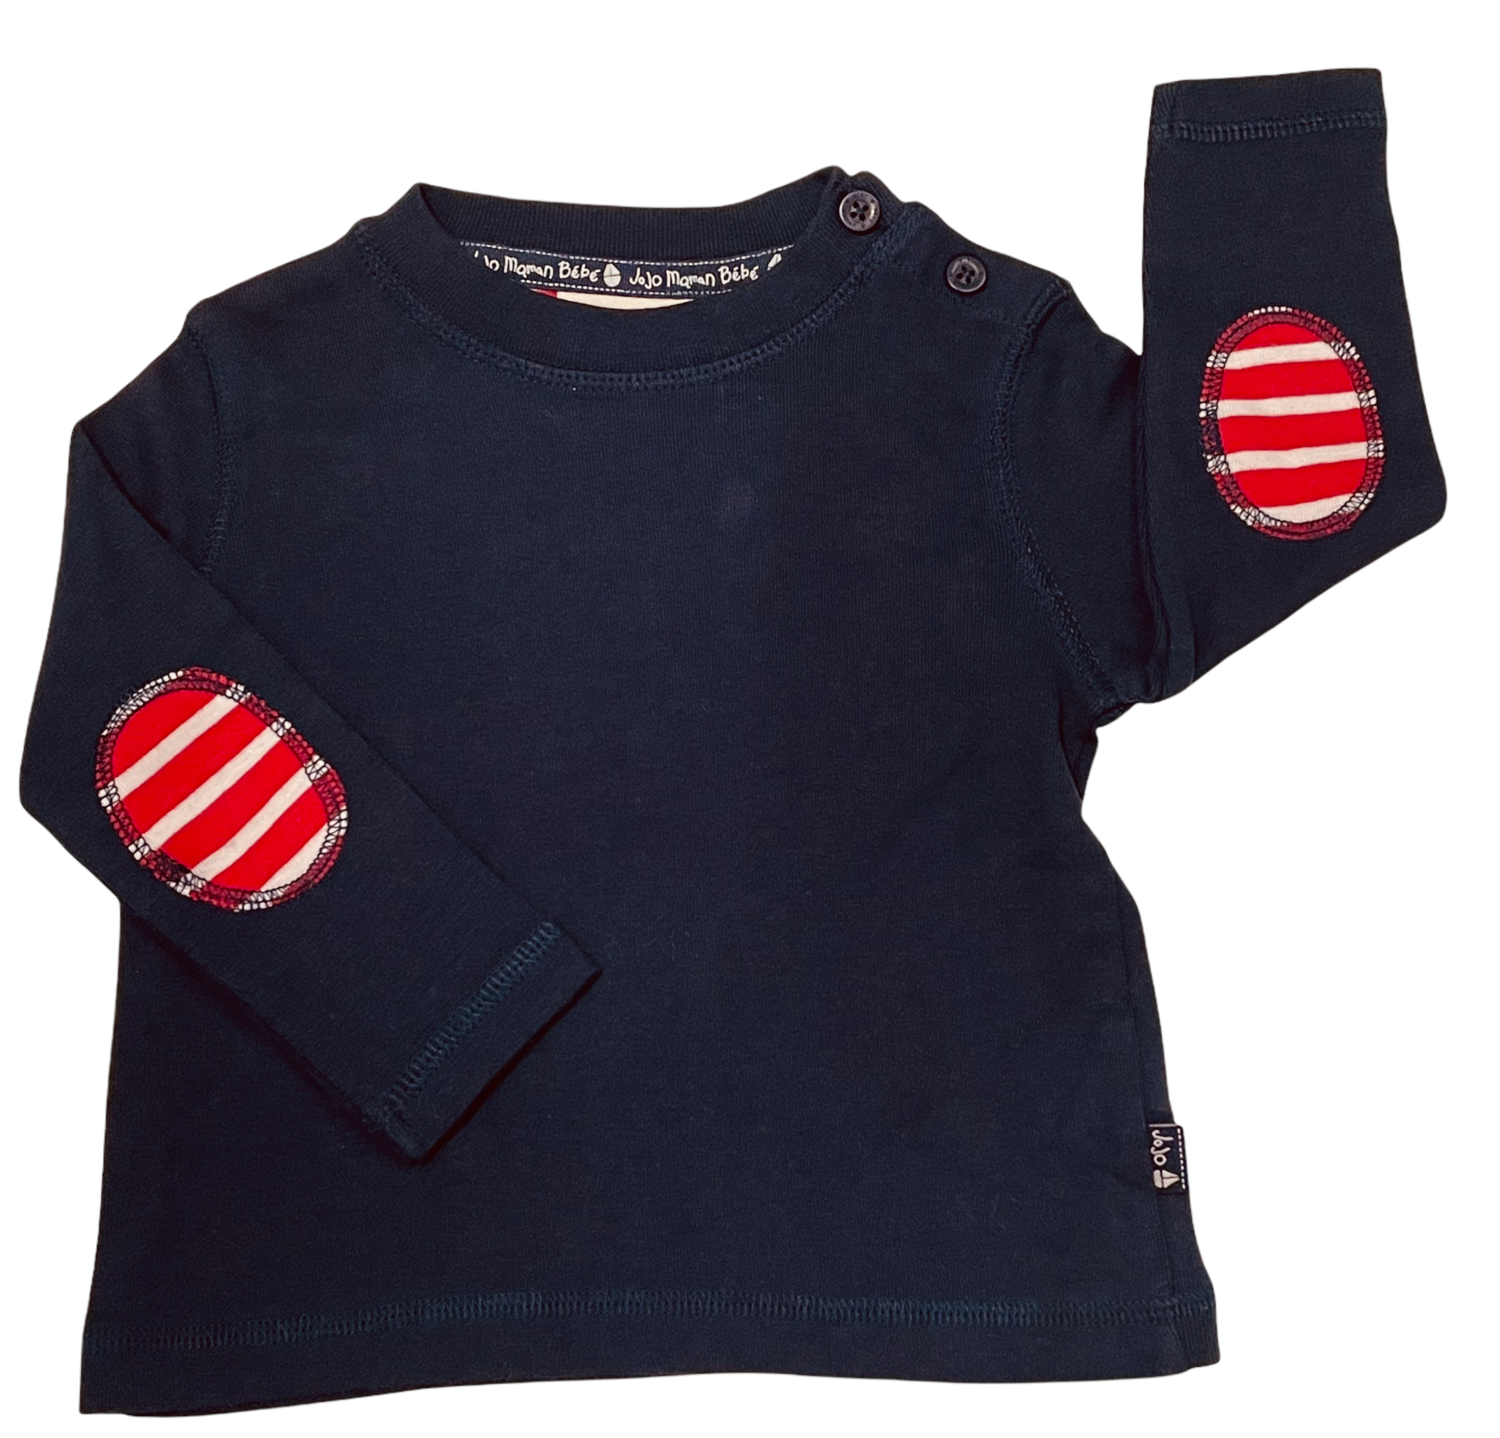 basic l/s navy tee w/elbow patch 6-12